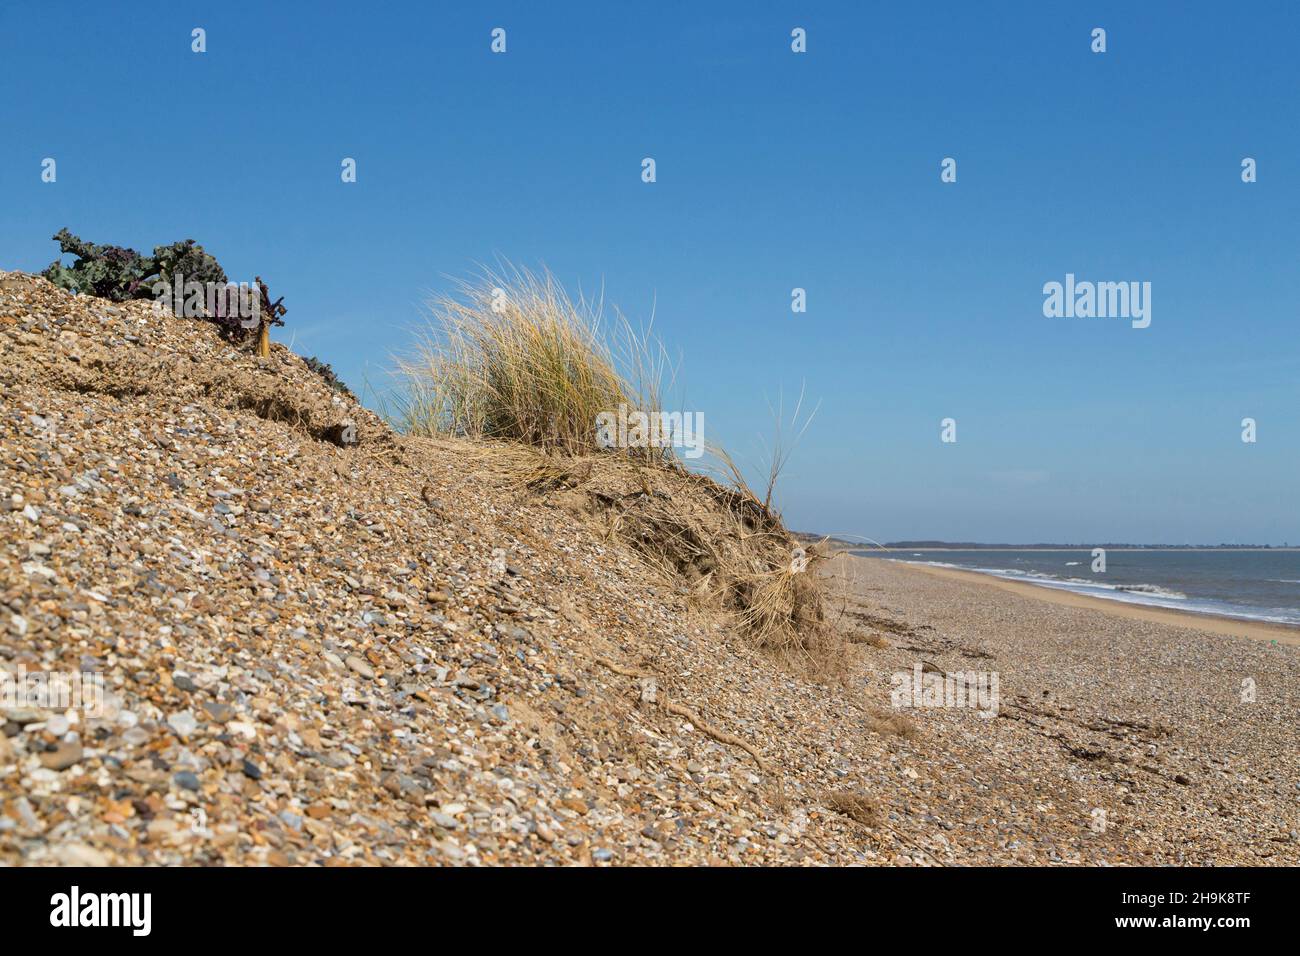 Sea Kale (Crambe maritima) and Marram Grass (Ammophila arenaria) growing on beach, with shingle area around them showing how plant roots slow erosion, Stock Photo